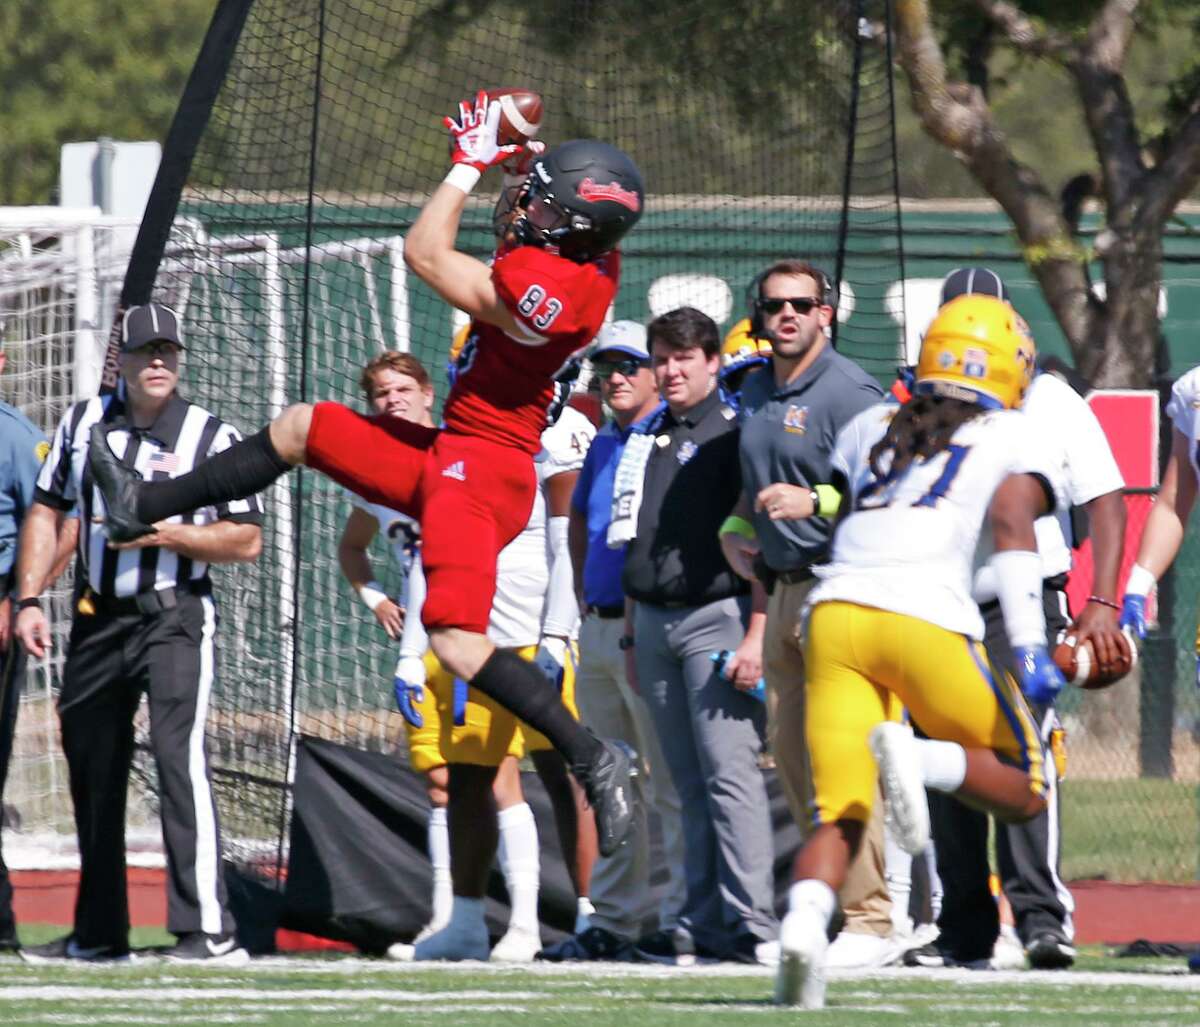 UIW wide receiver Trevor Begue makes a reception in first quarter on Saturday, Sept. 25, 2021. Halftime score UIW 21 McNeese 0.